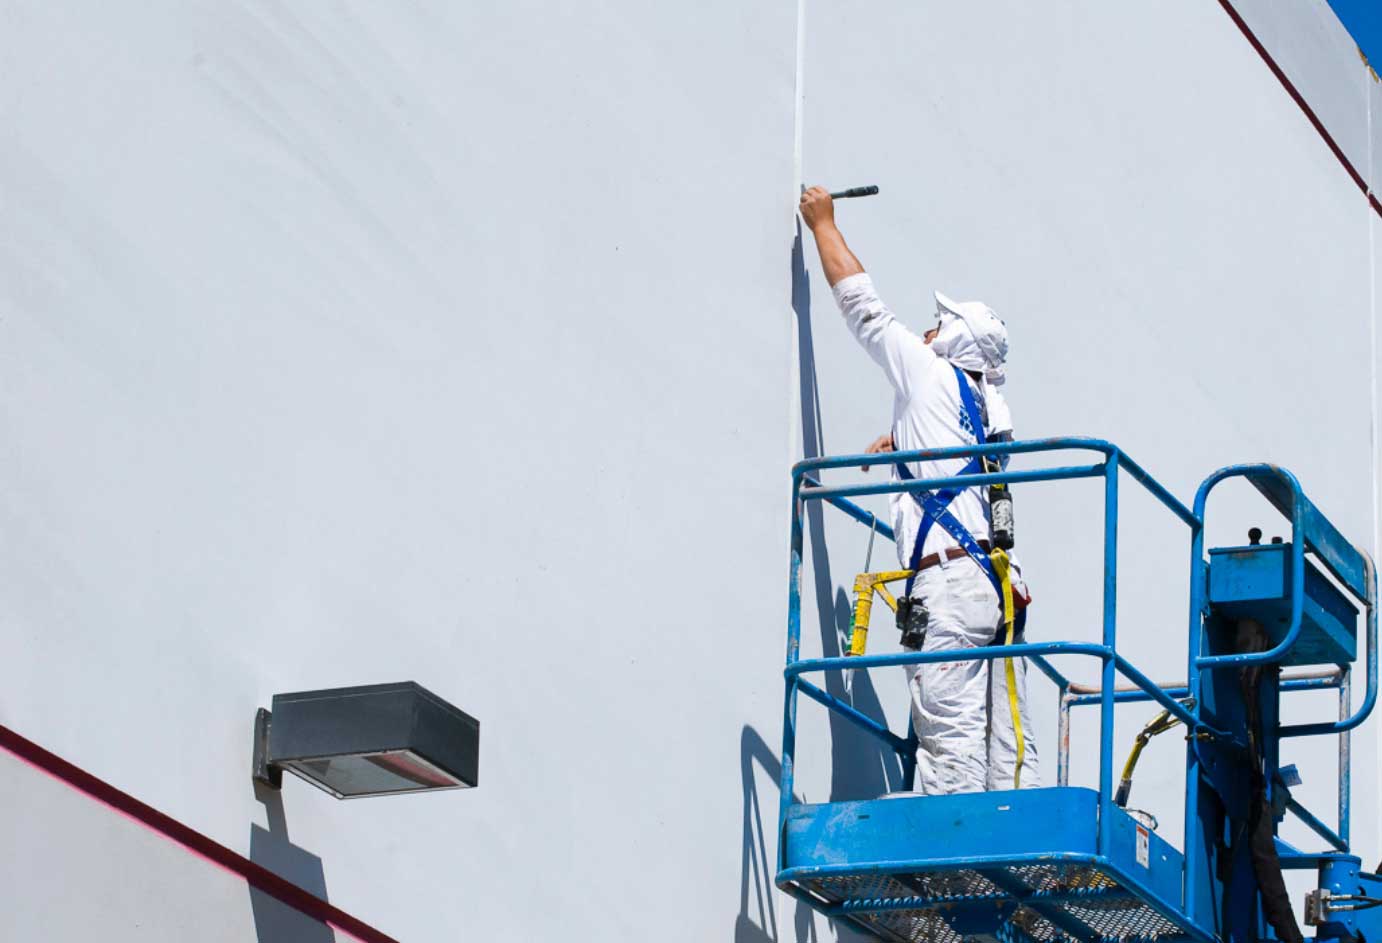 Experienced and Skilled Painting Professionals